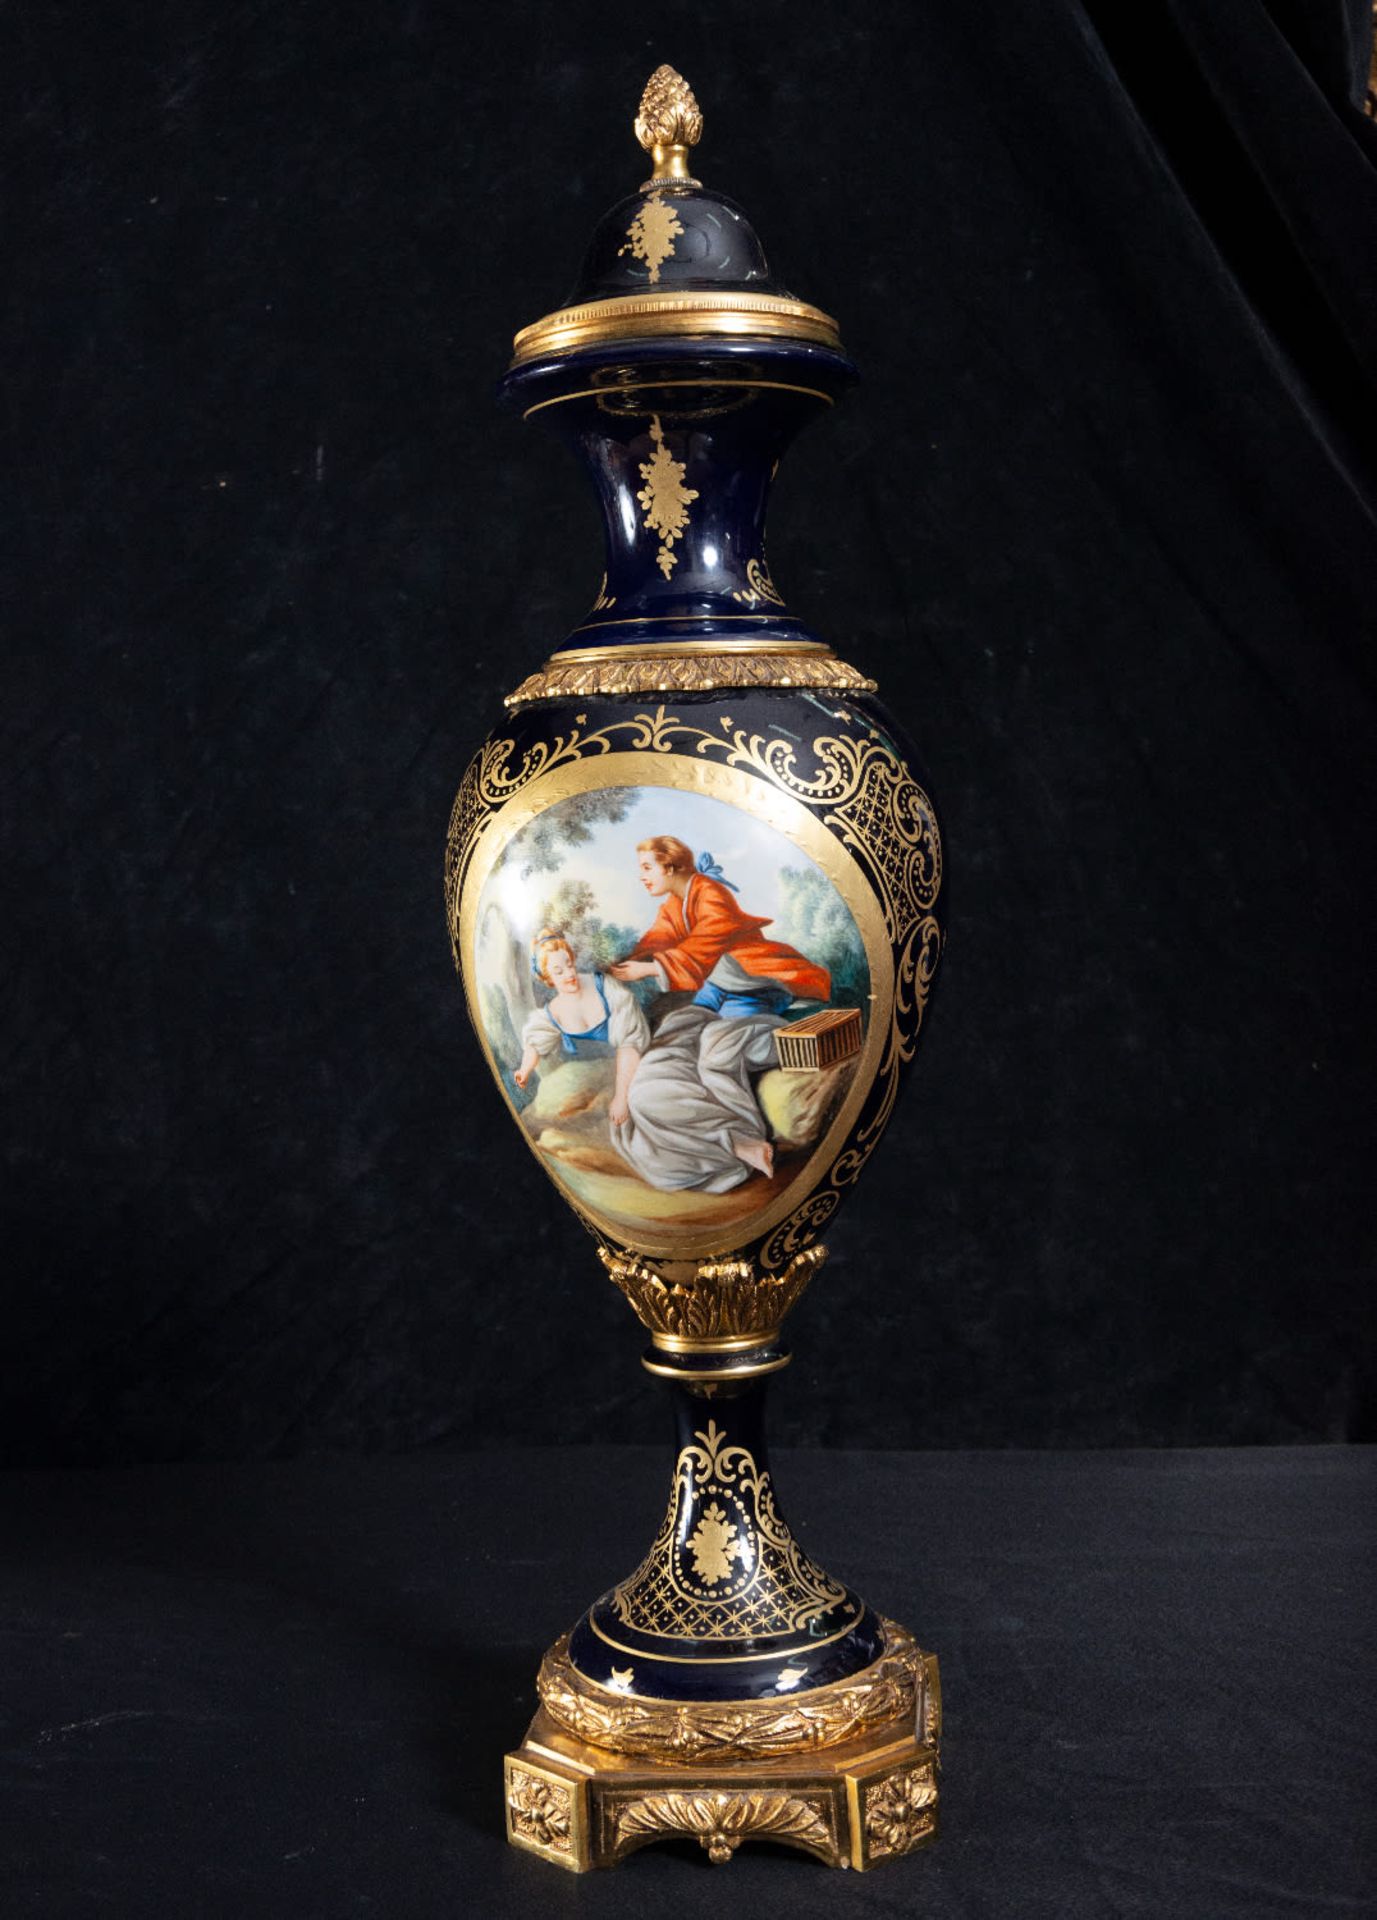 Great pair of French porcelain vases "Sevres Blue", mounted in gilt bronze, late 19th century - Image 5 of 6